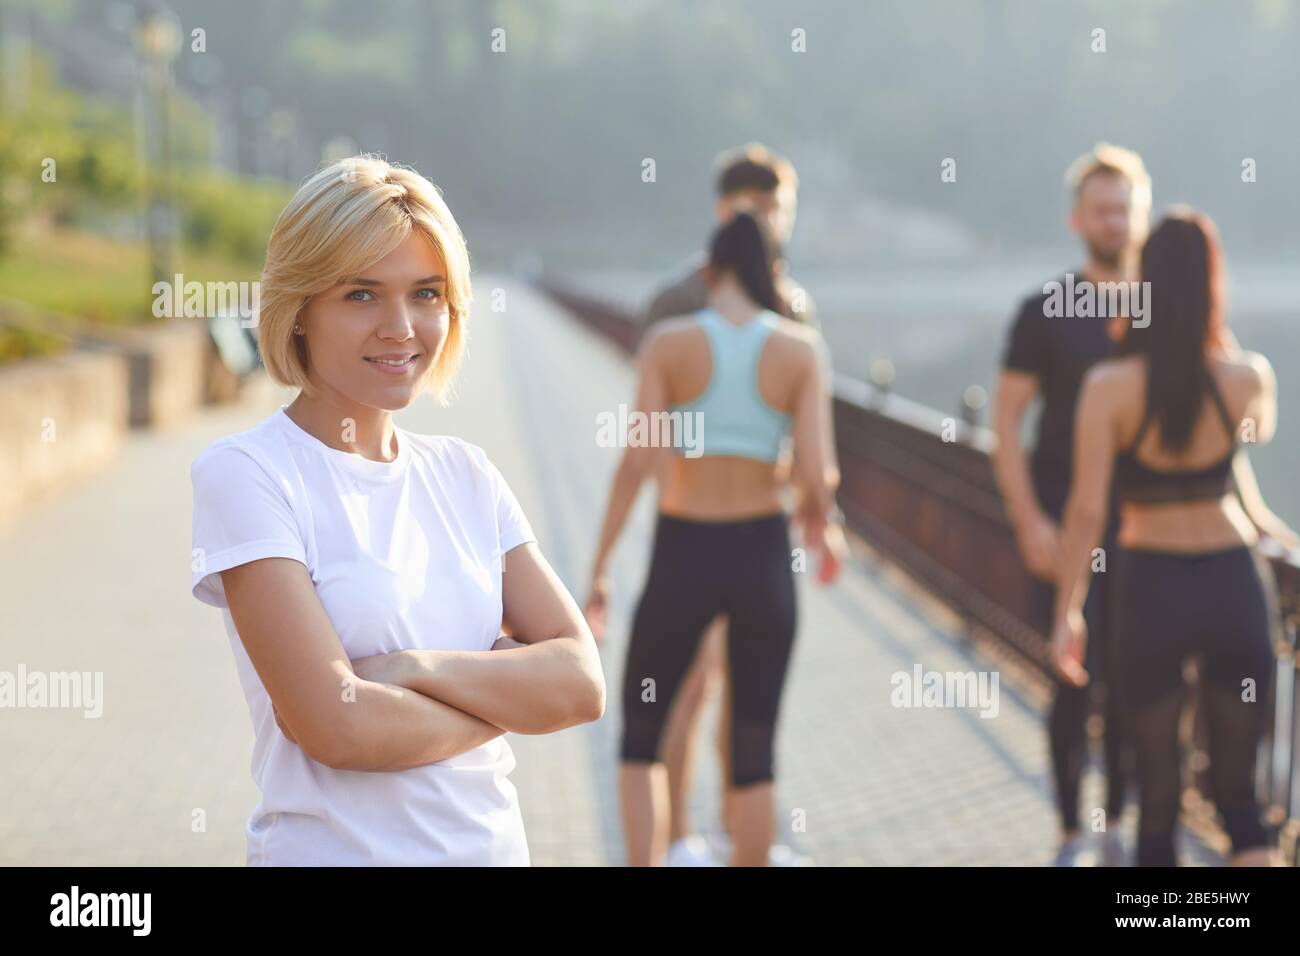 Sporty girl smiles on the background of friends athletes in the park Stock Photo